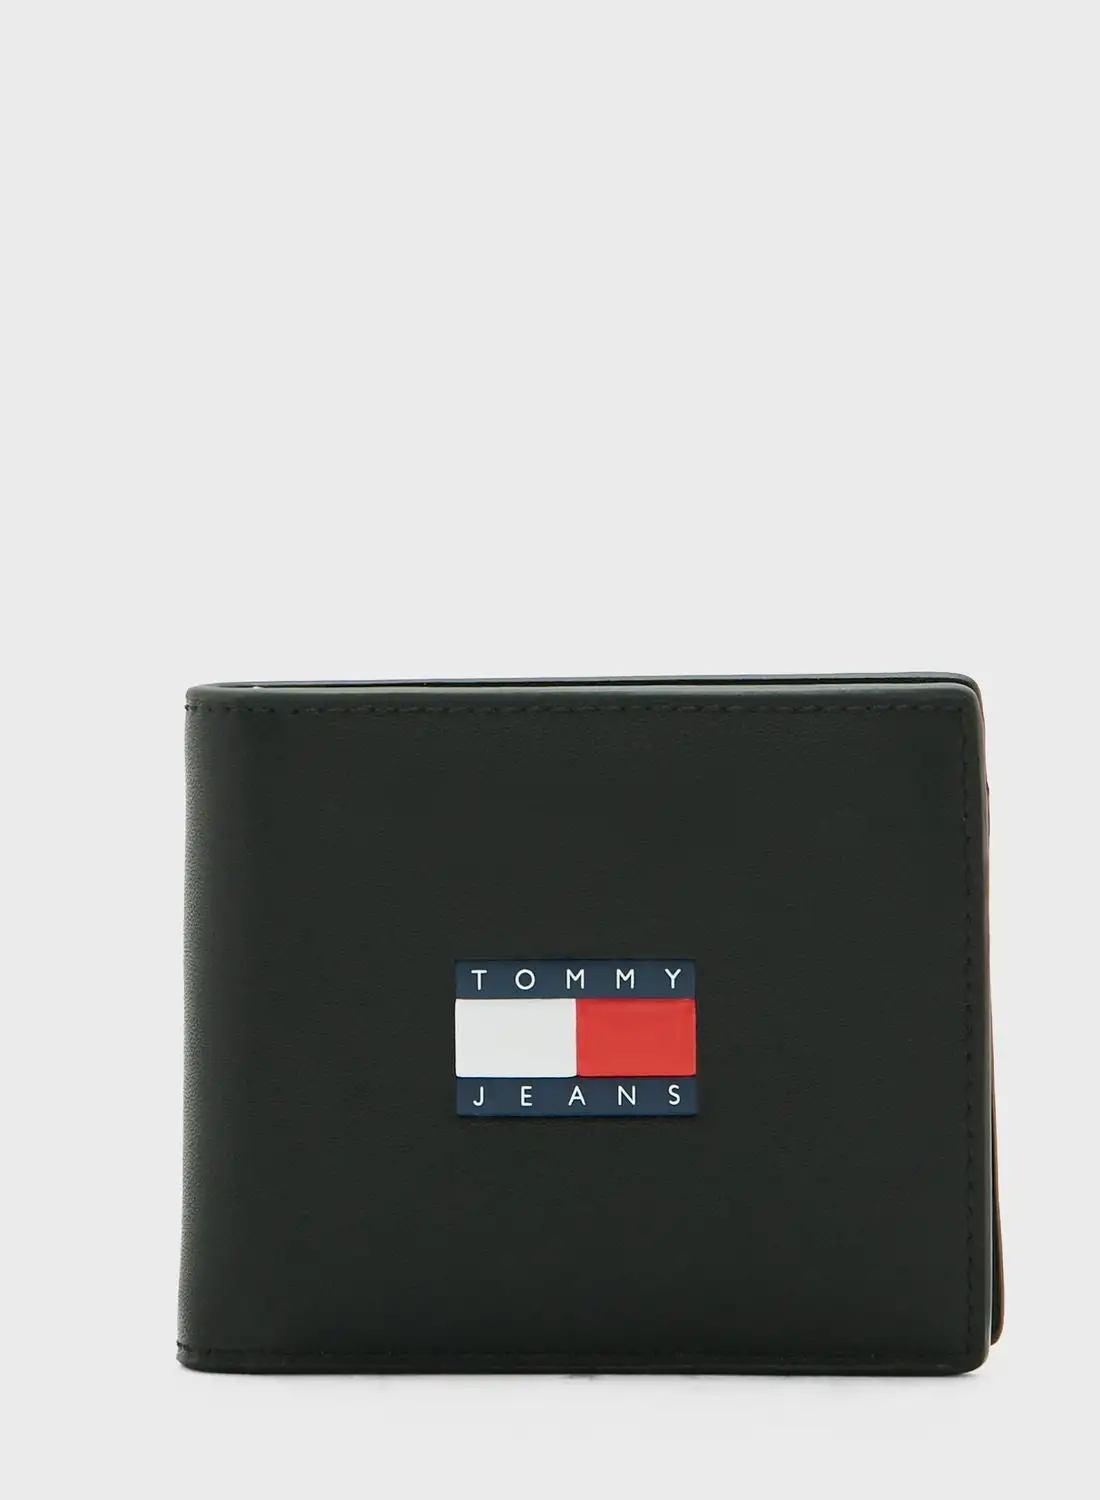 TOMMY HILFIGER Heritage Leather Card And Coin Holder